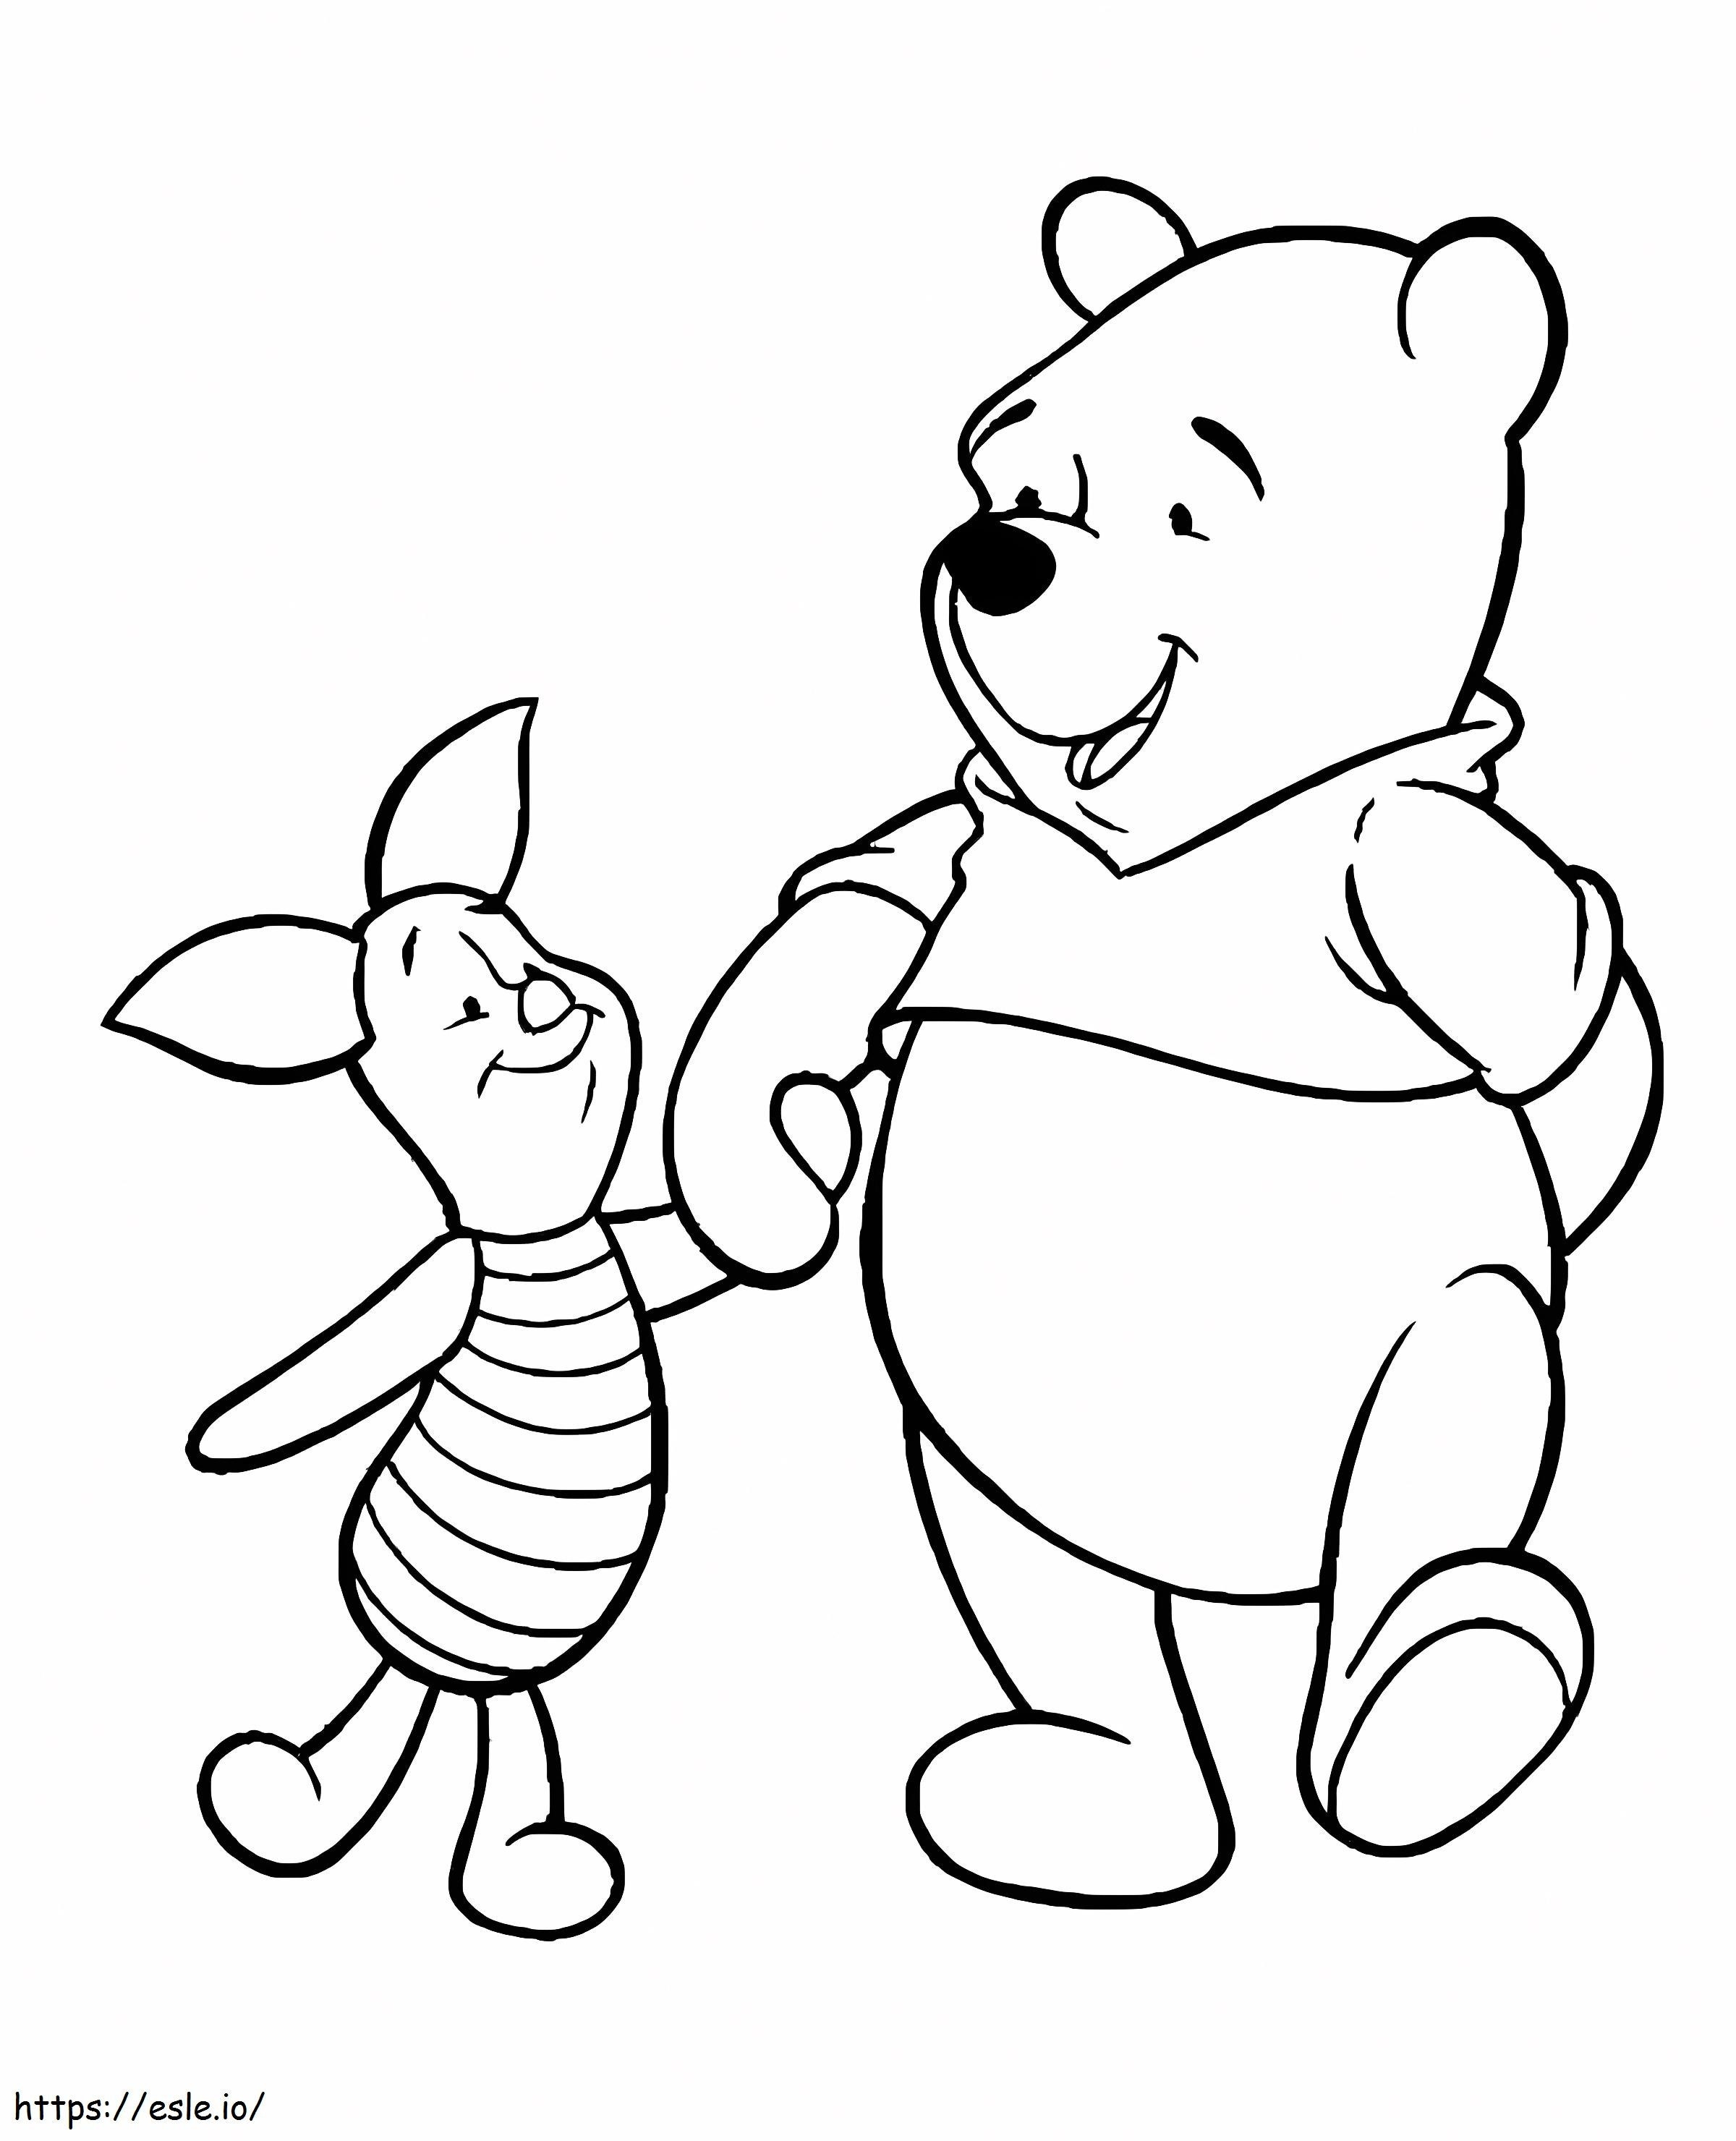 Piglet And Pooh Held Hand coloring page